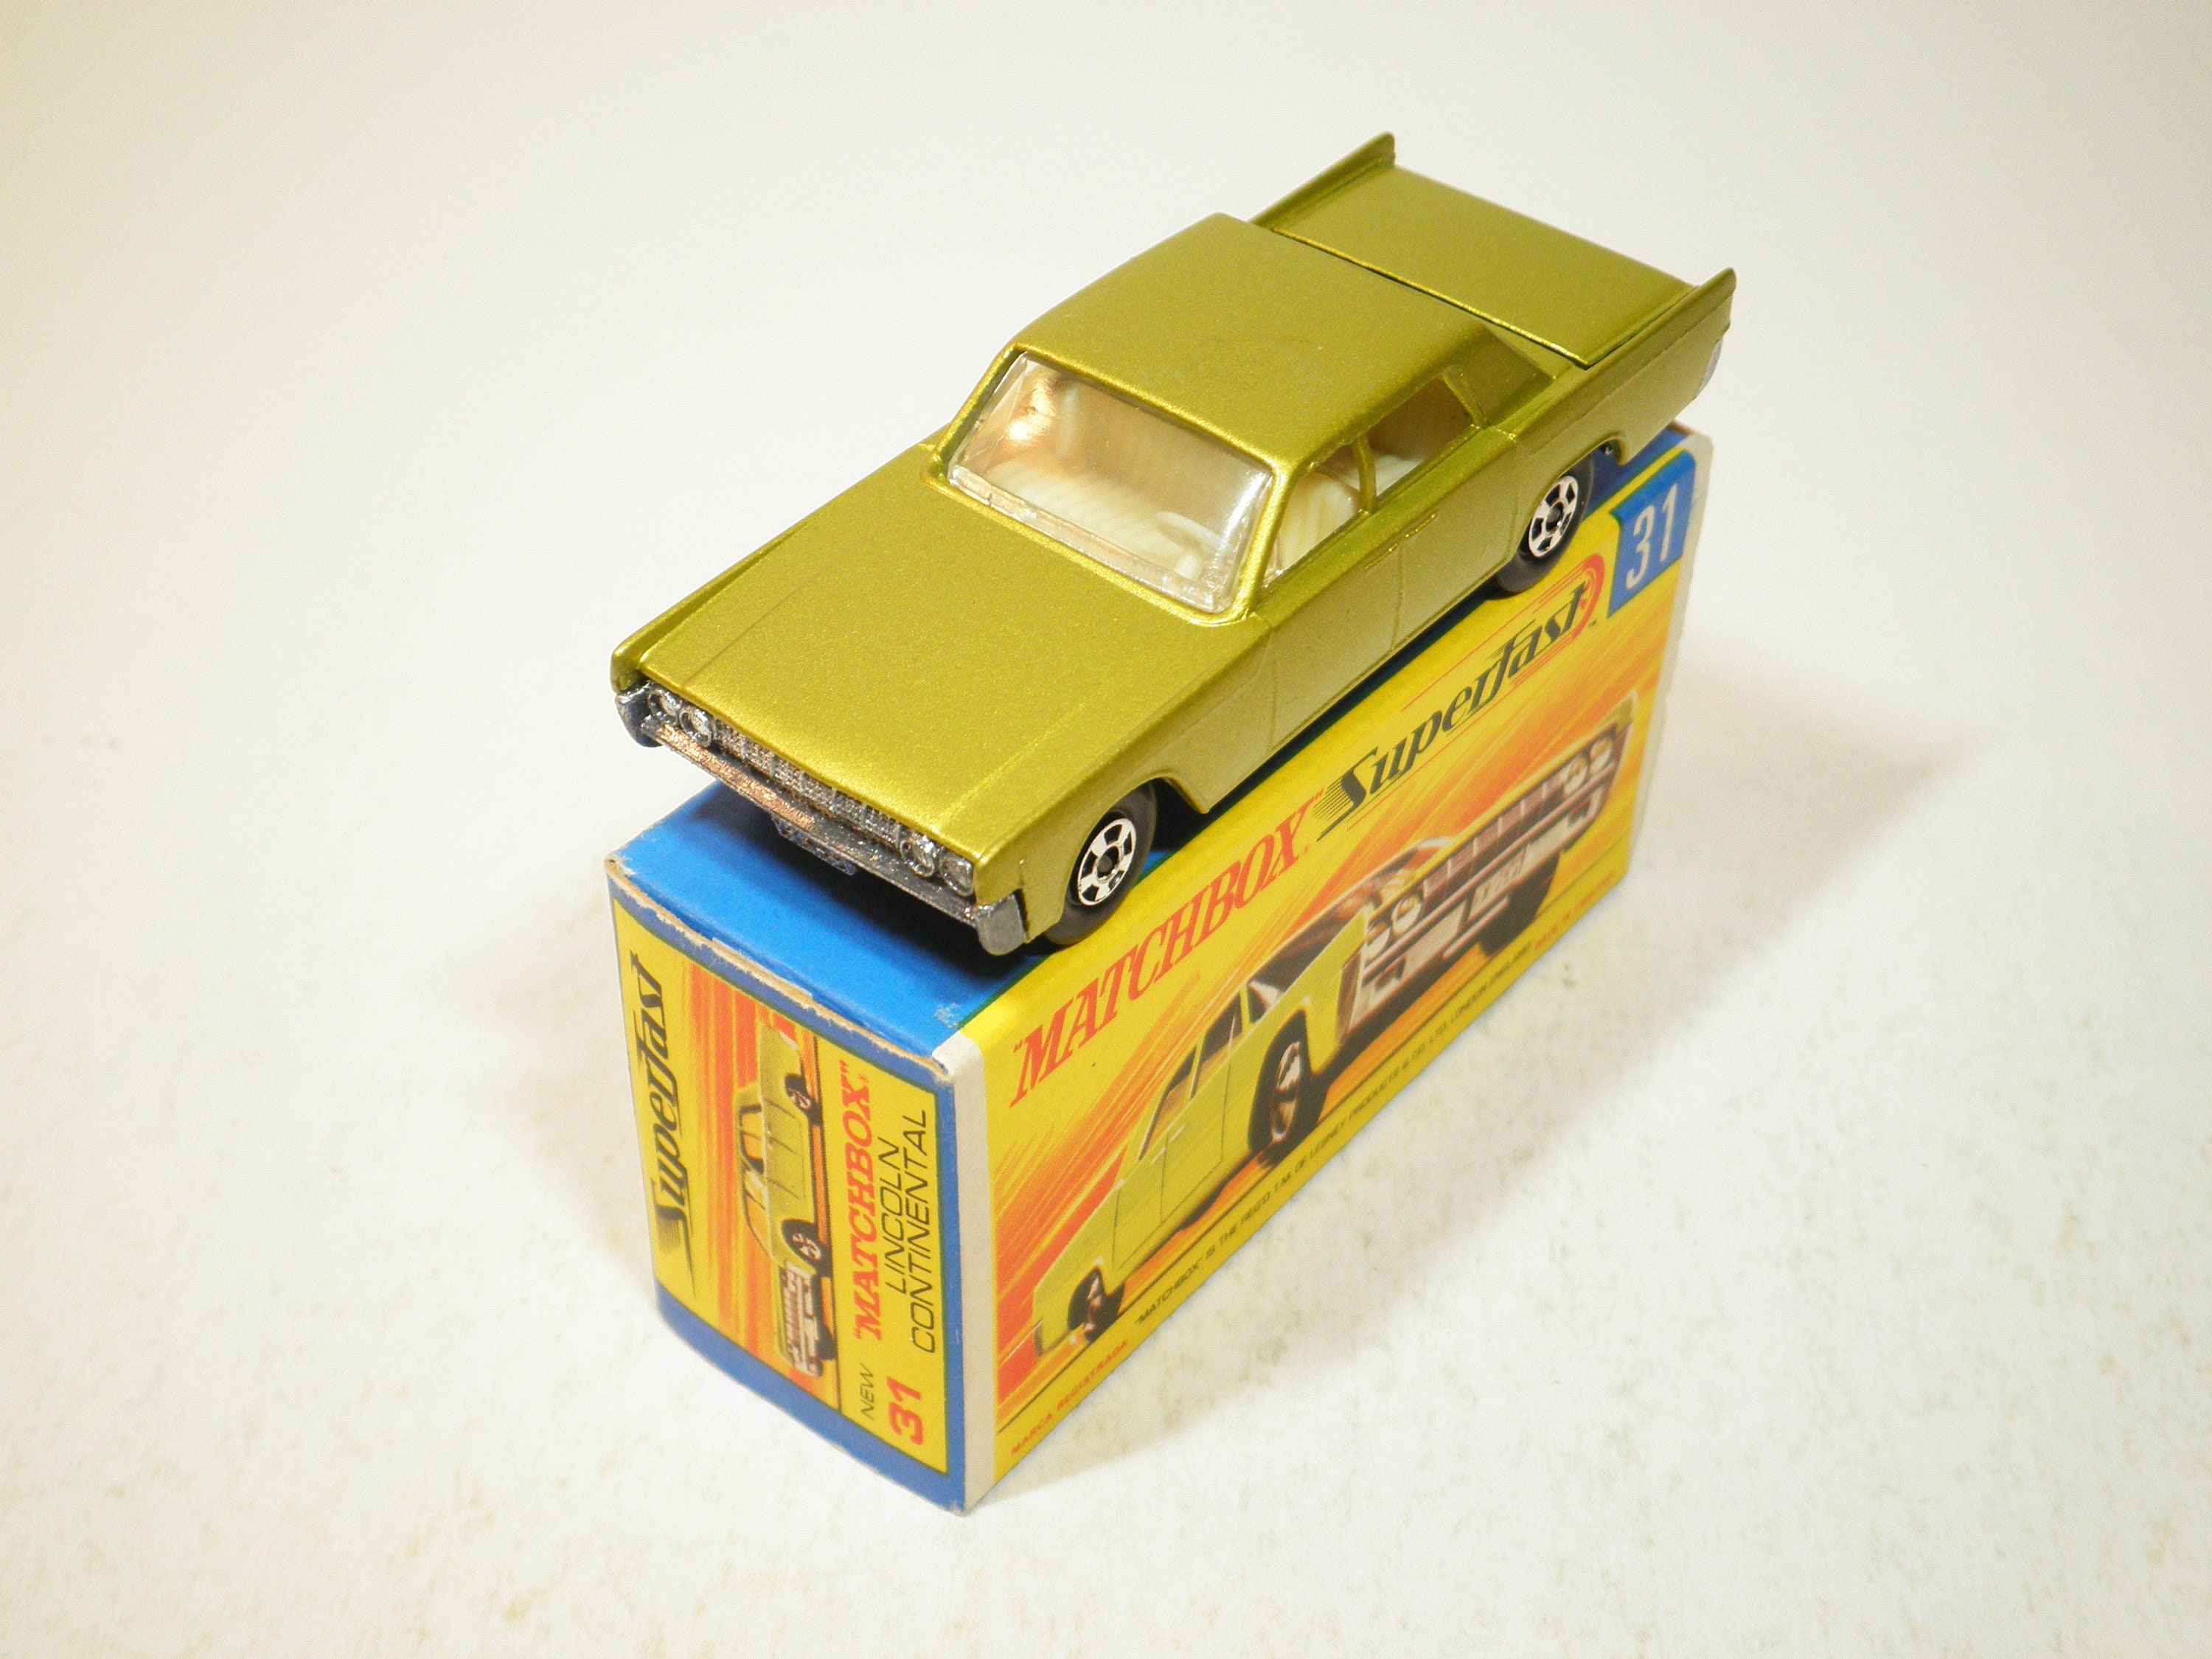 Matchbox series No. 31 Lincoln Continental Like 